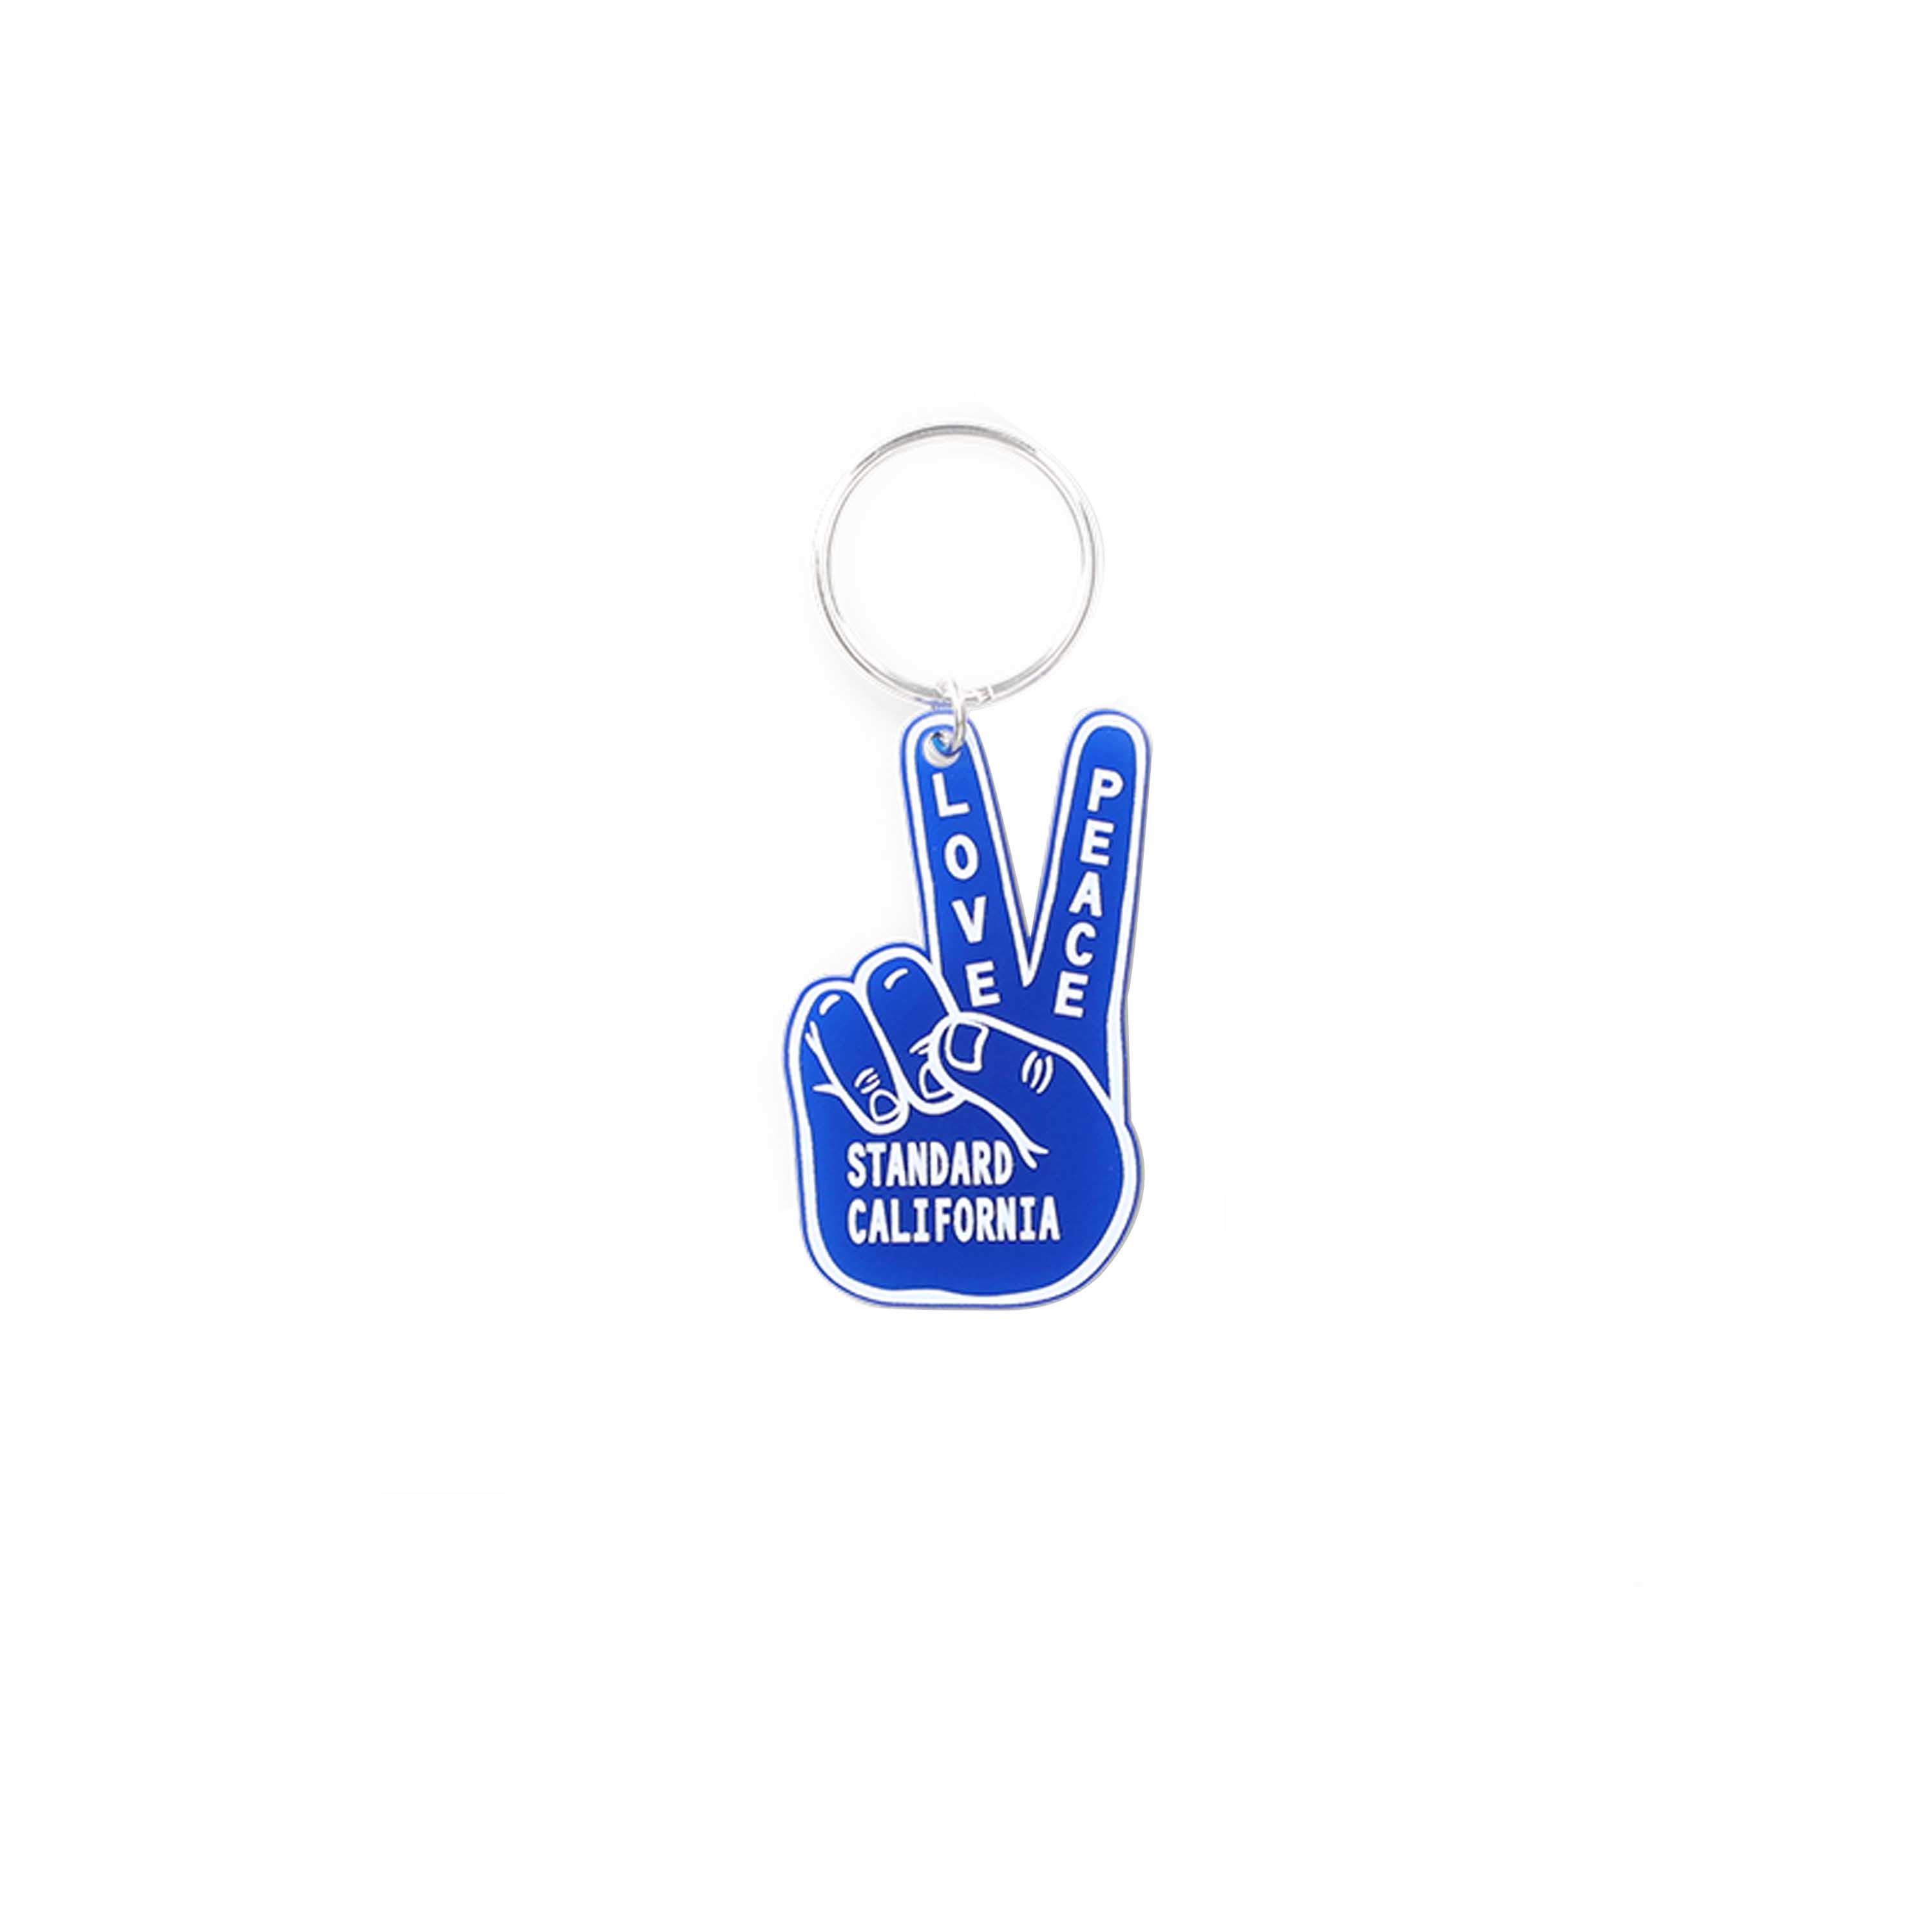 X BUTTON WORKS PEACE KEY HOLDER - BLUE